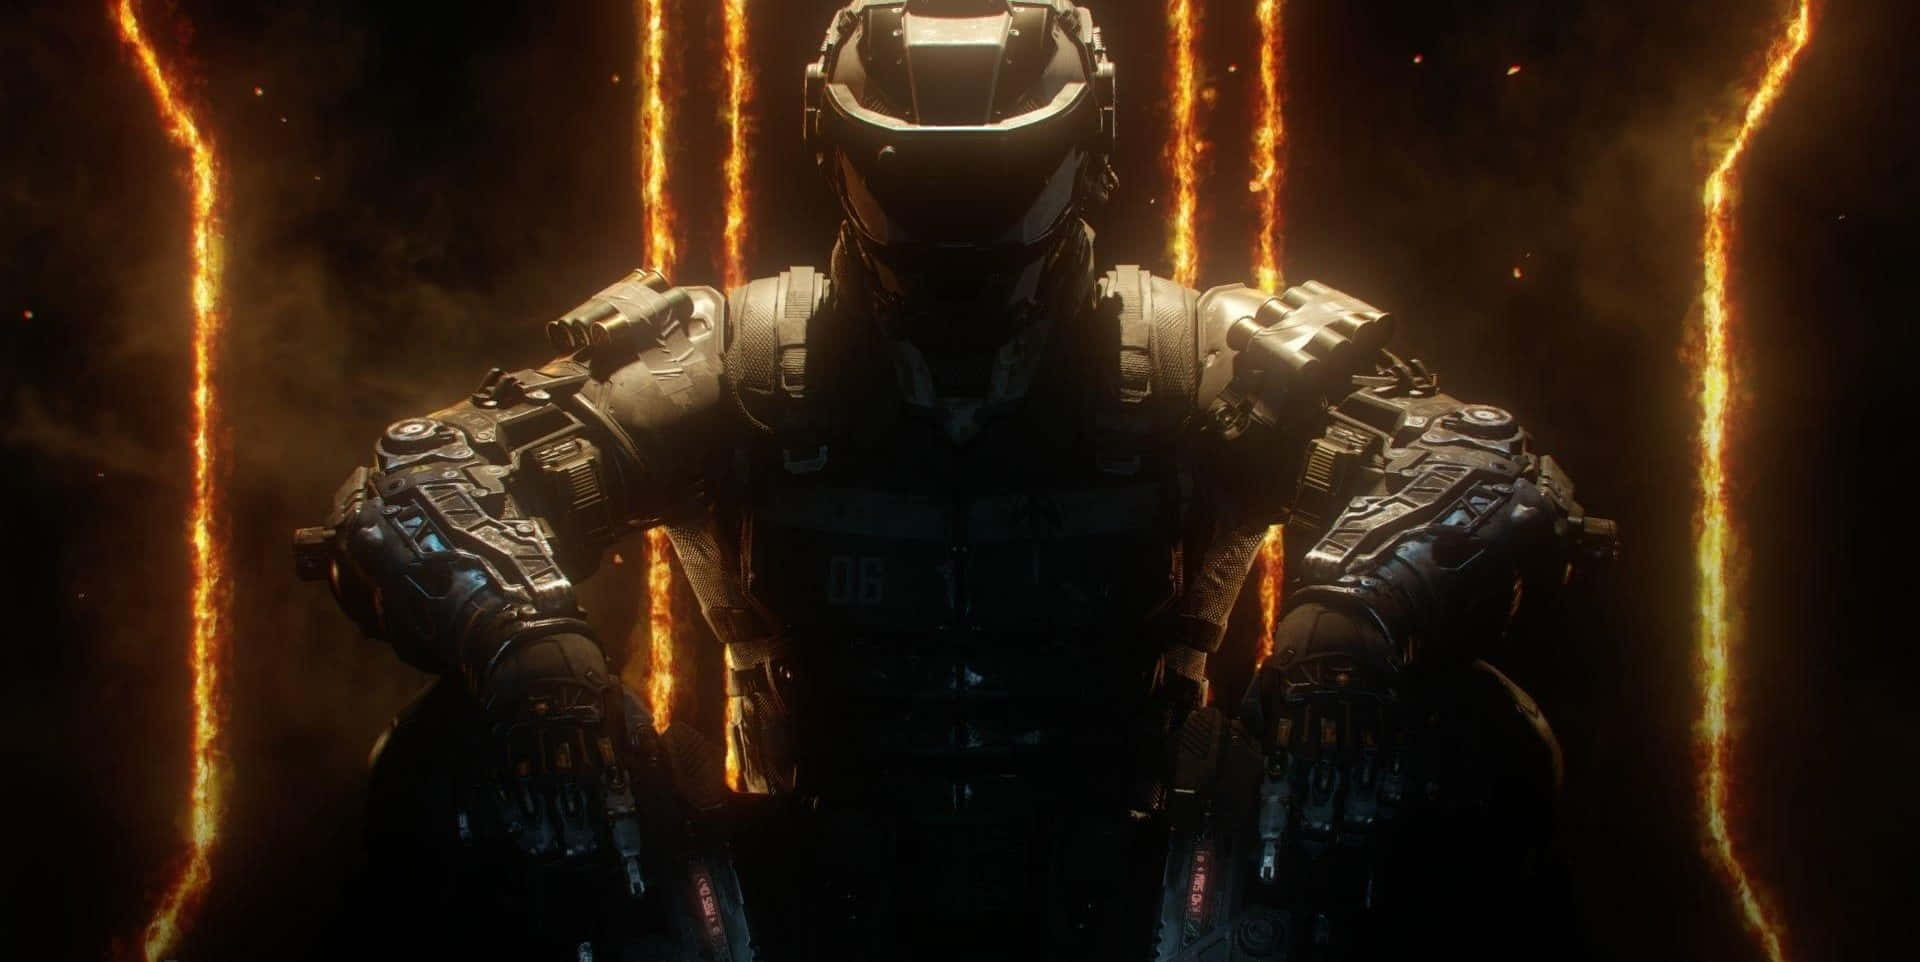 Get Ready for Action in Call of Duty: Black Ops 3 Wallpaper